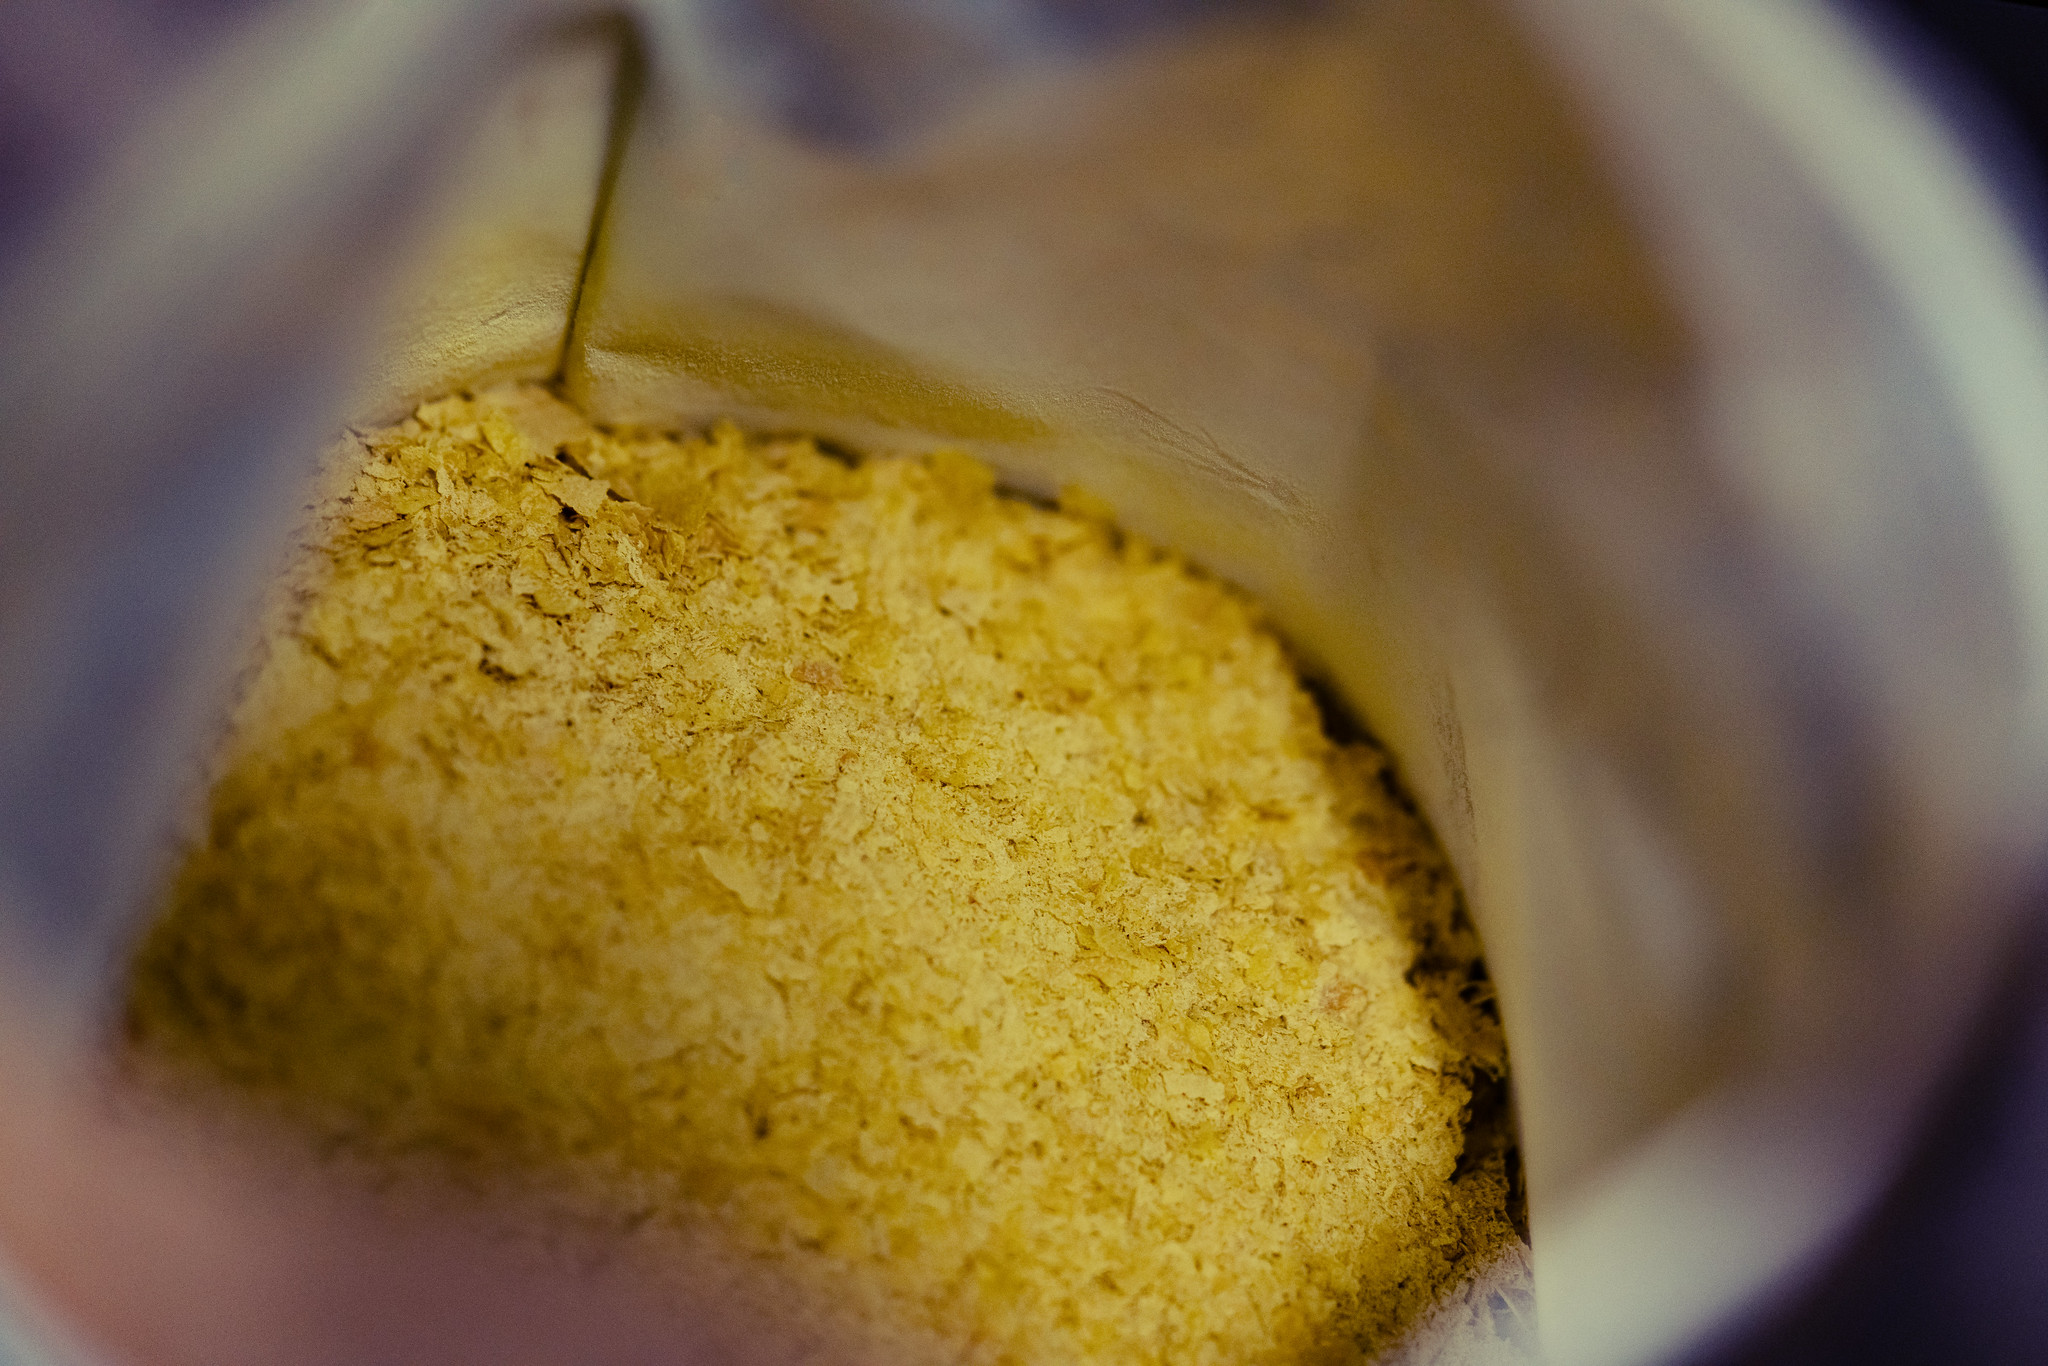 A bag of nutritional yeast. Image: Tony Webster / Flickr